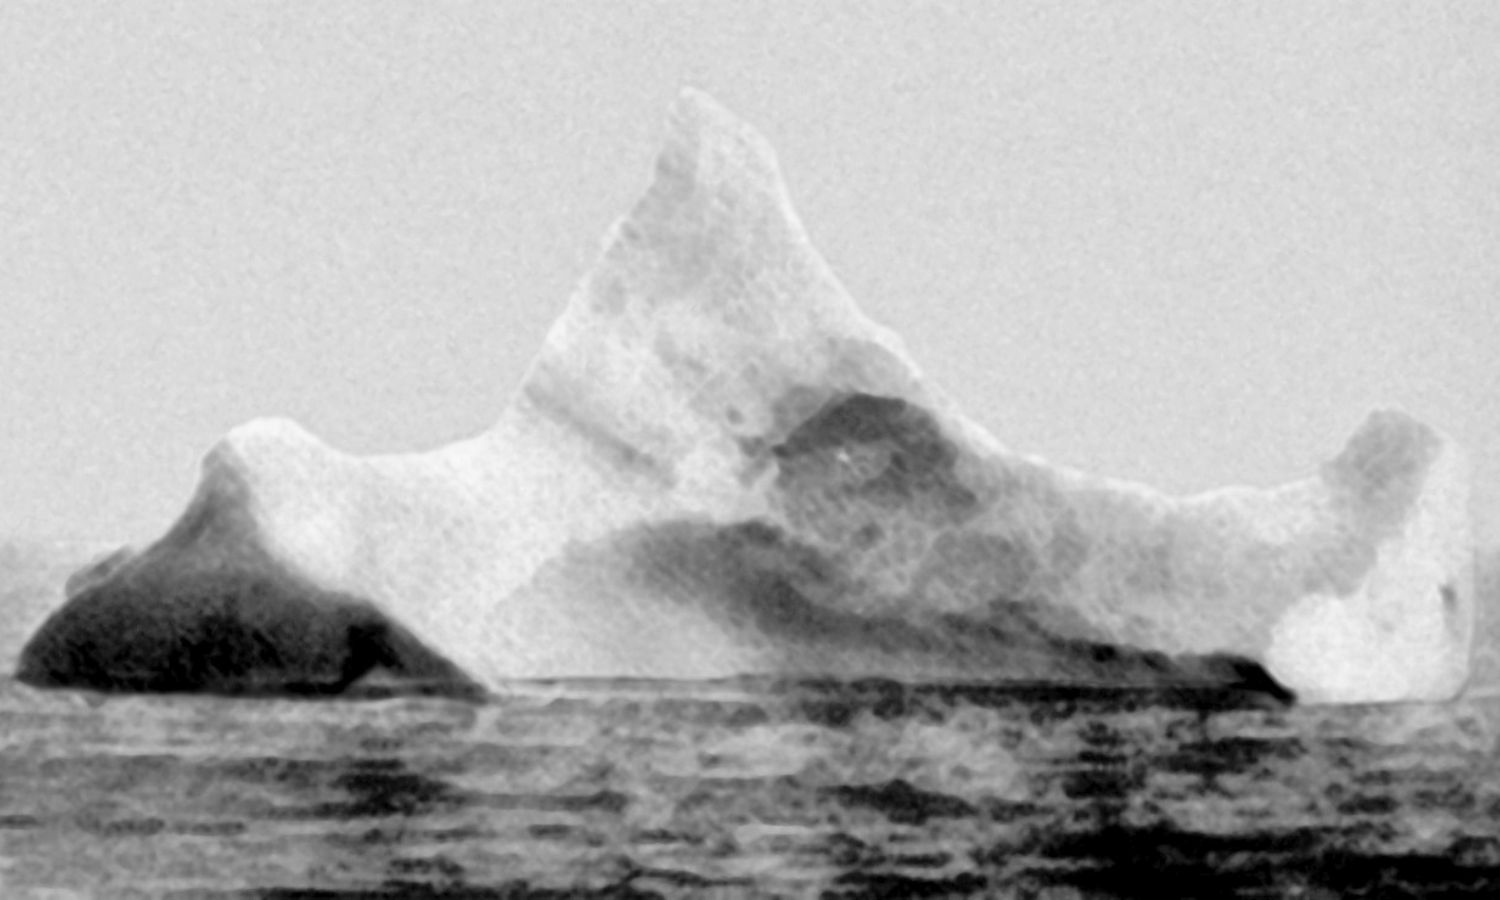 An image showing the iceberg that the Titanic struck in 1912.